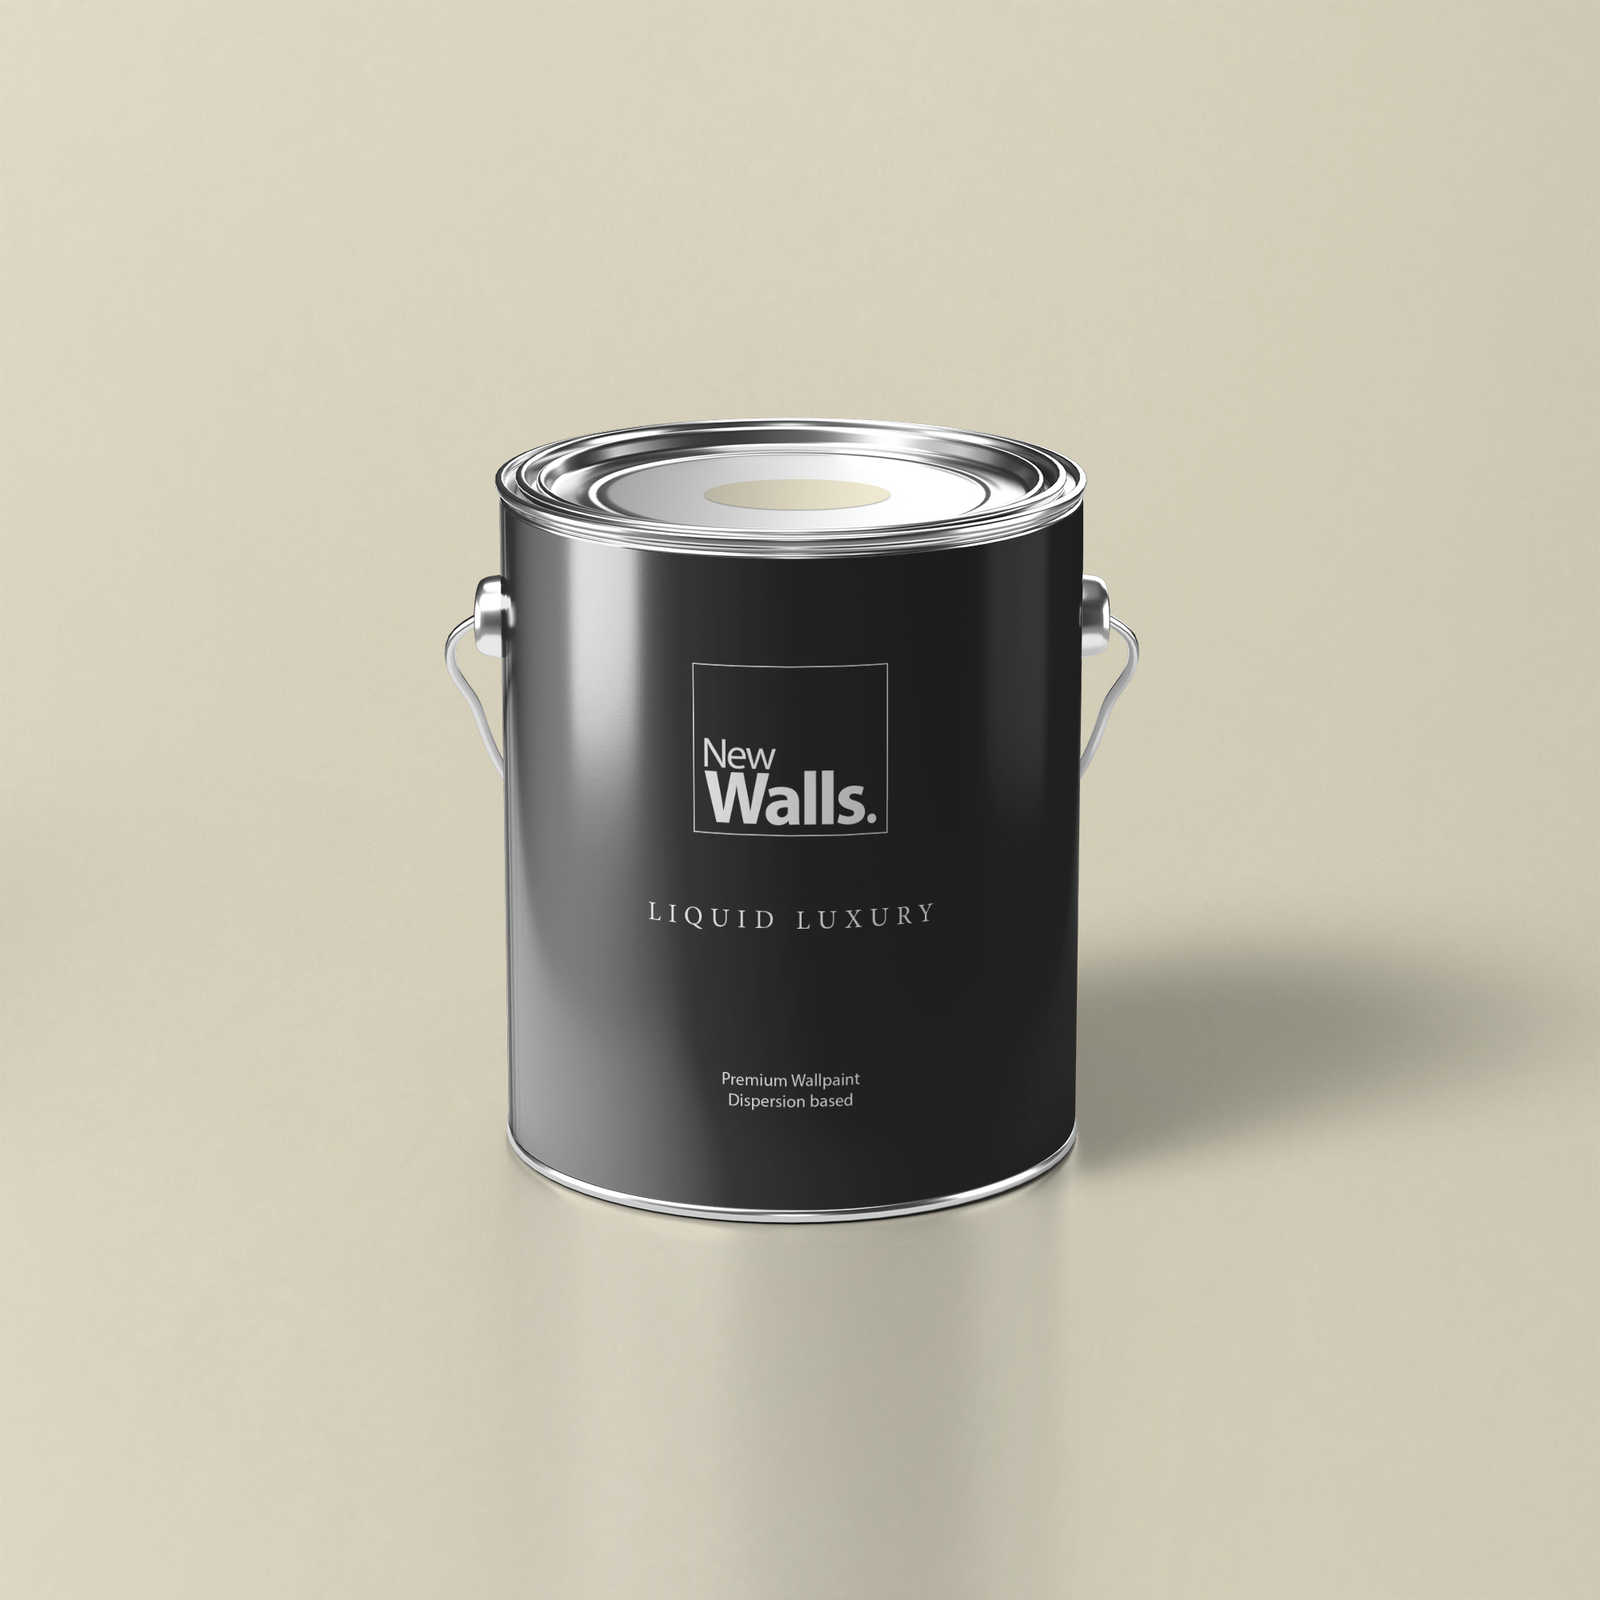 Premium Wall Paint serene champagne »Lucky Lime« NW600 – 5 litre
